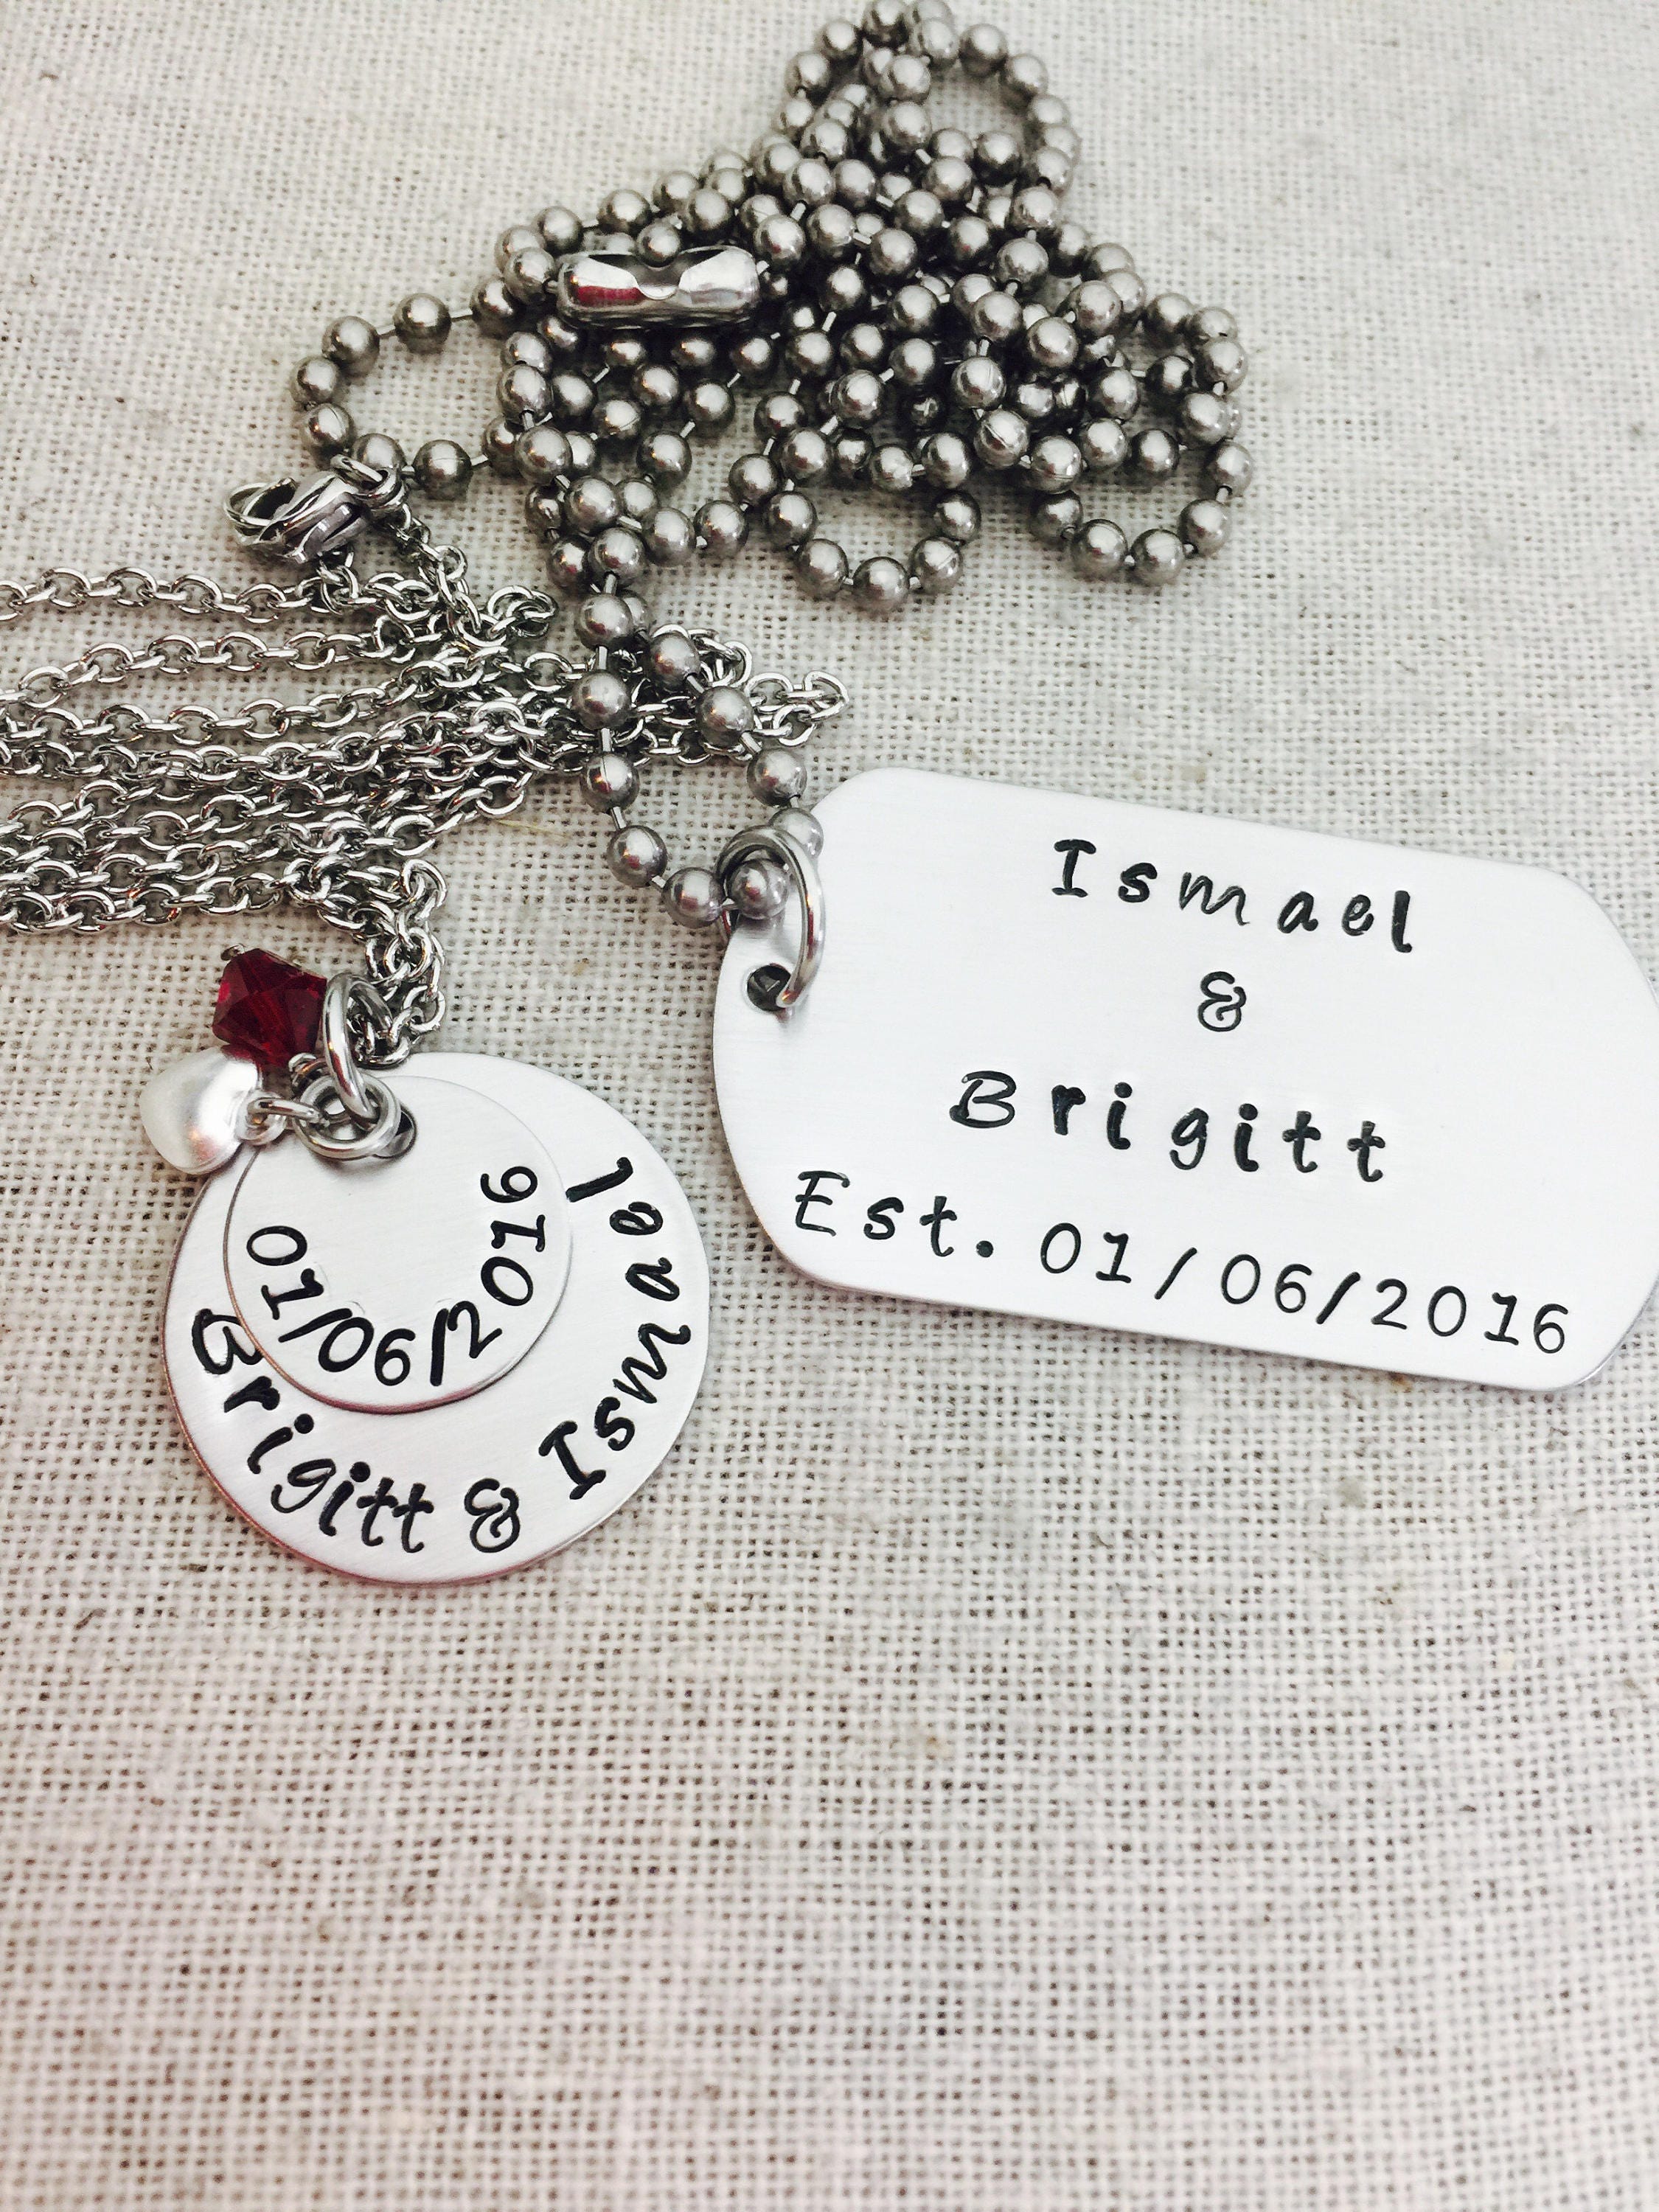 Personalized Couples Necklace Key Chain Set Wedding Gift His | Etsy